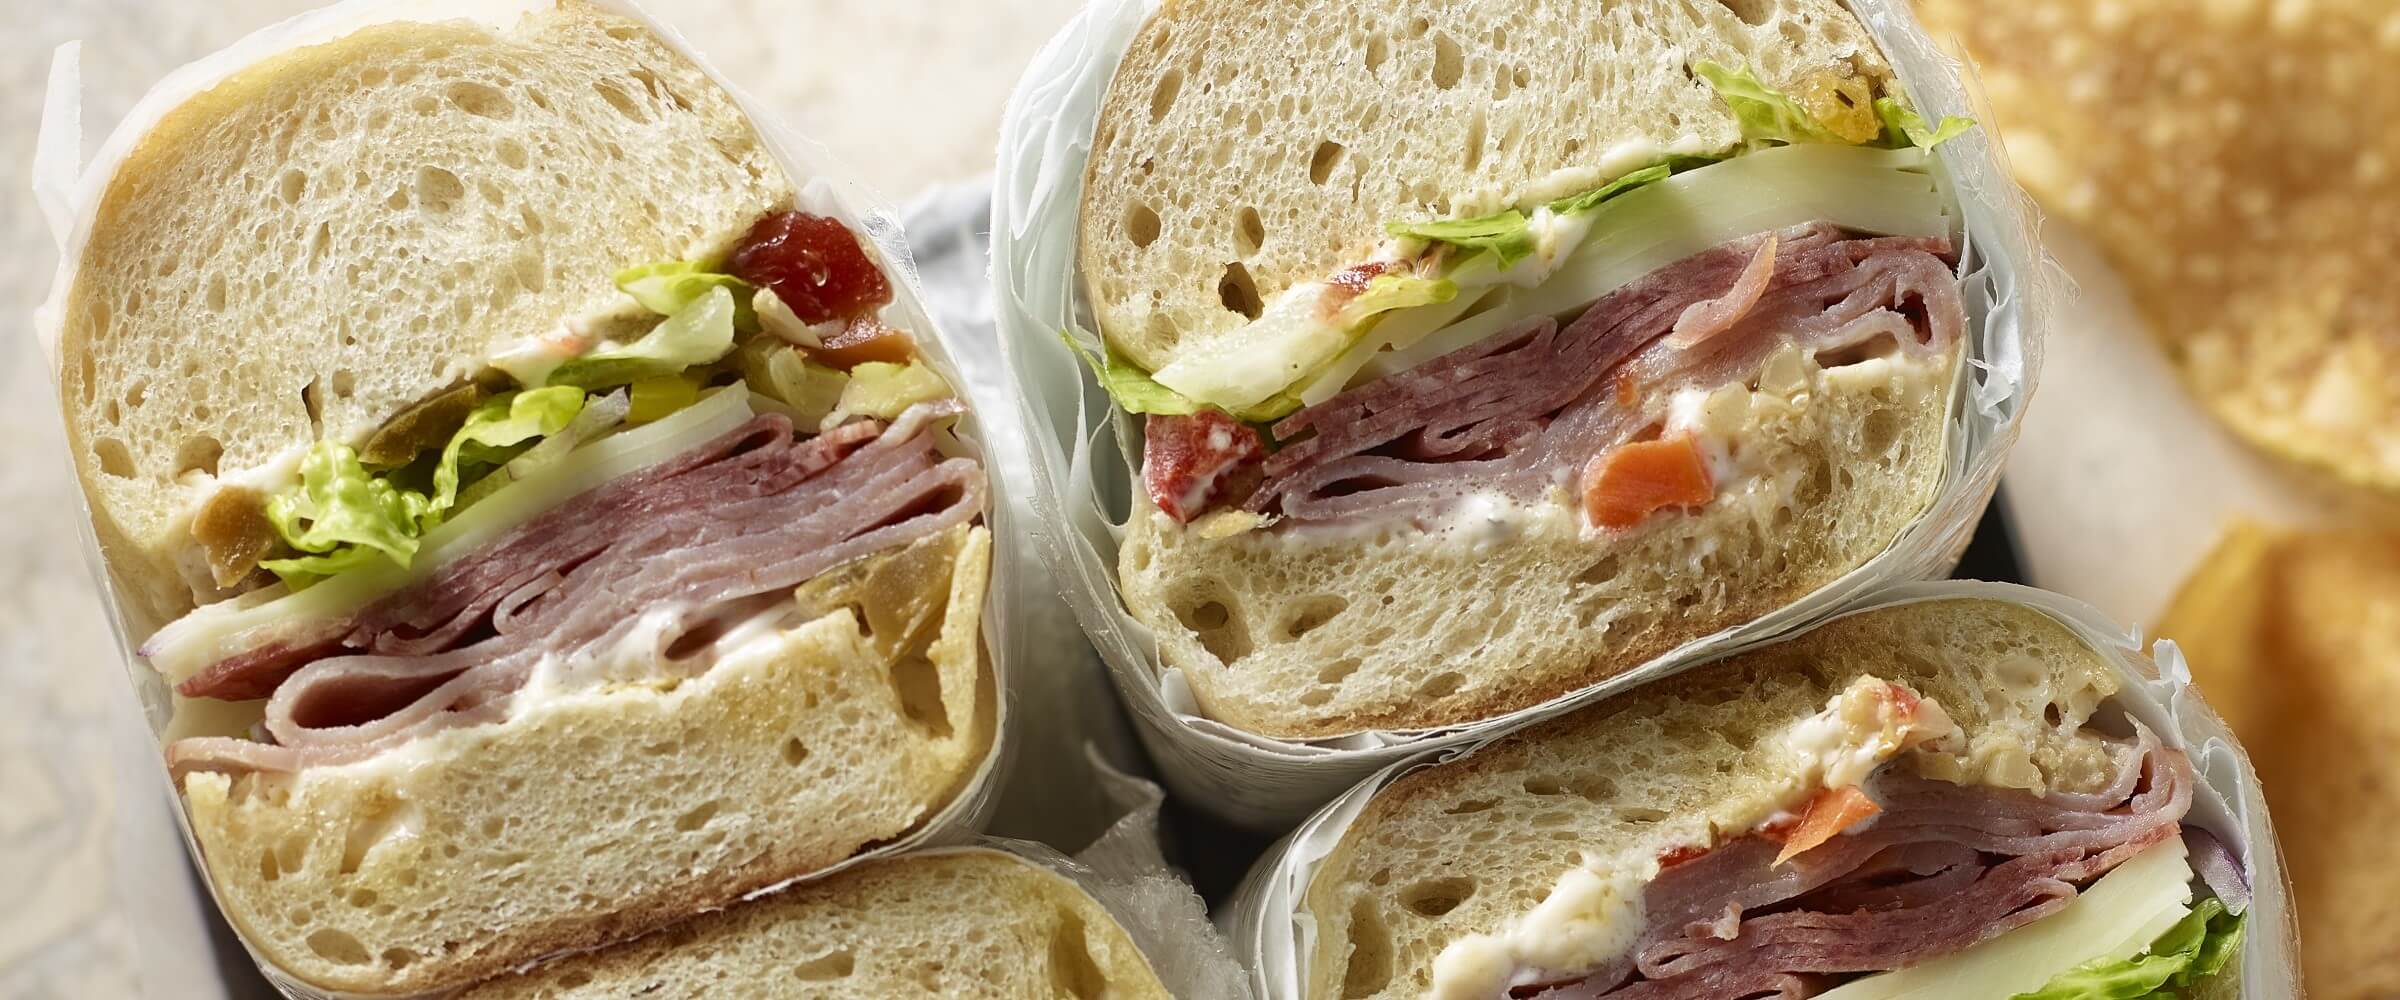 hoagie with vegetables wrapped in paper